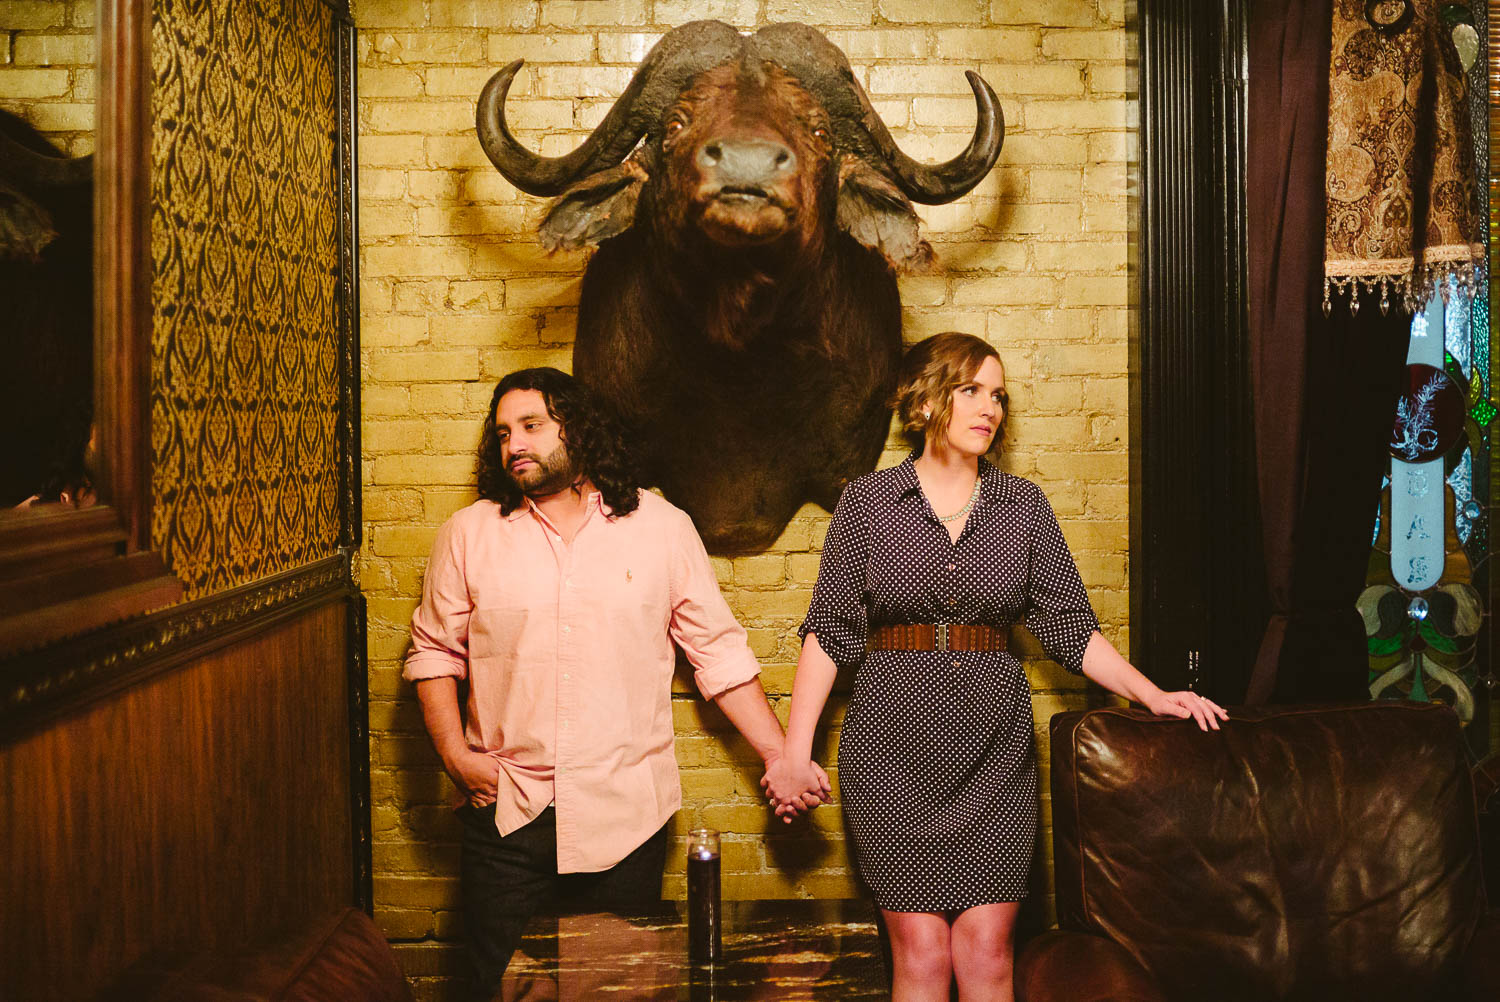 Couples engagement shoot at Junipar Tar a old bar in San Antonio, Texas with a wild buffalo head setting the photo in a triangular structure